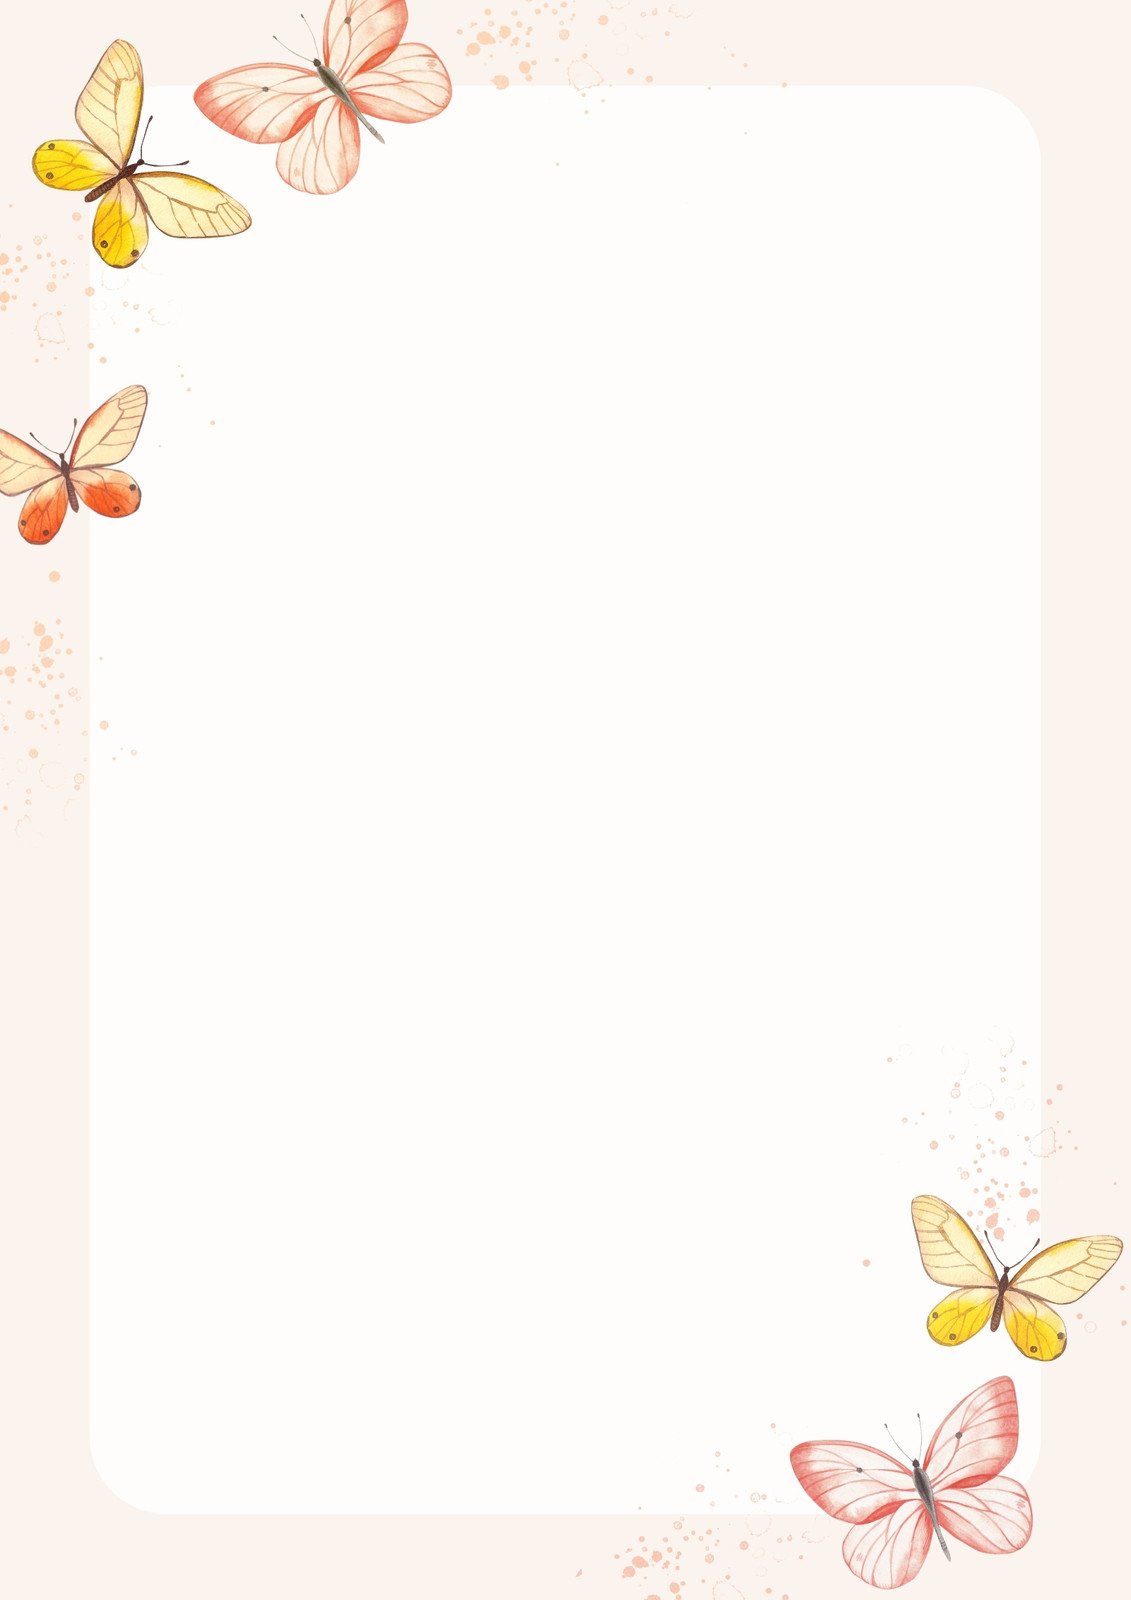 Free and customizable butterfly templates